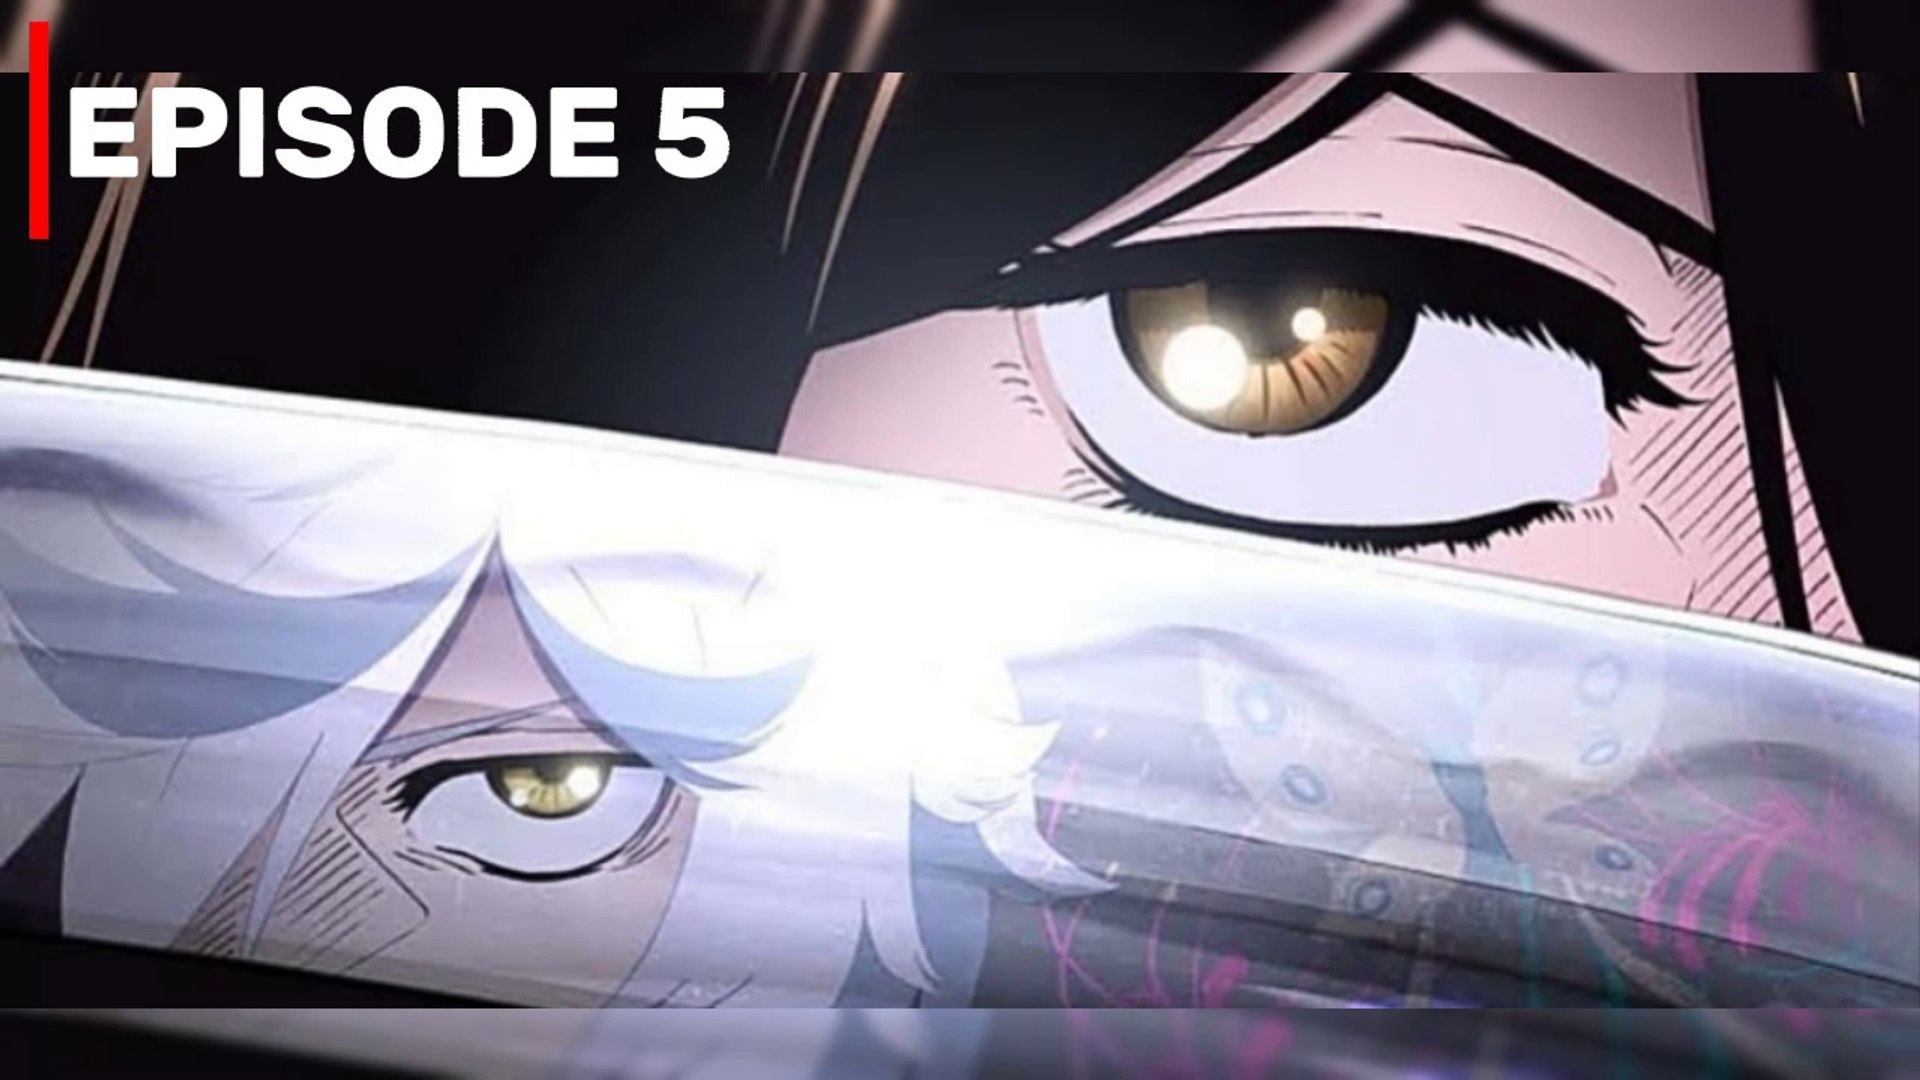 Blue lock Episode - 1 Sub Hindi . anime in india,anime in hindi,indian anime ,anime,anime india,hindi anime,indian anime is bad,indian hate anime,indian  anime kirtichow,india,indian references in anime (hindi),indian characters  in anime (hindi) 